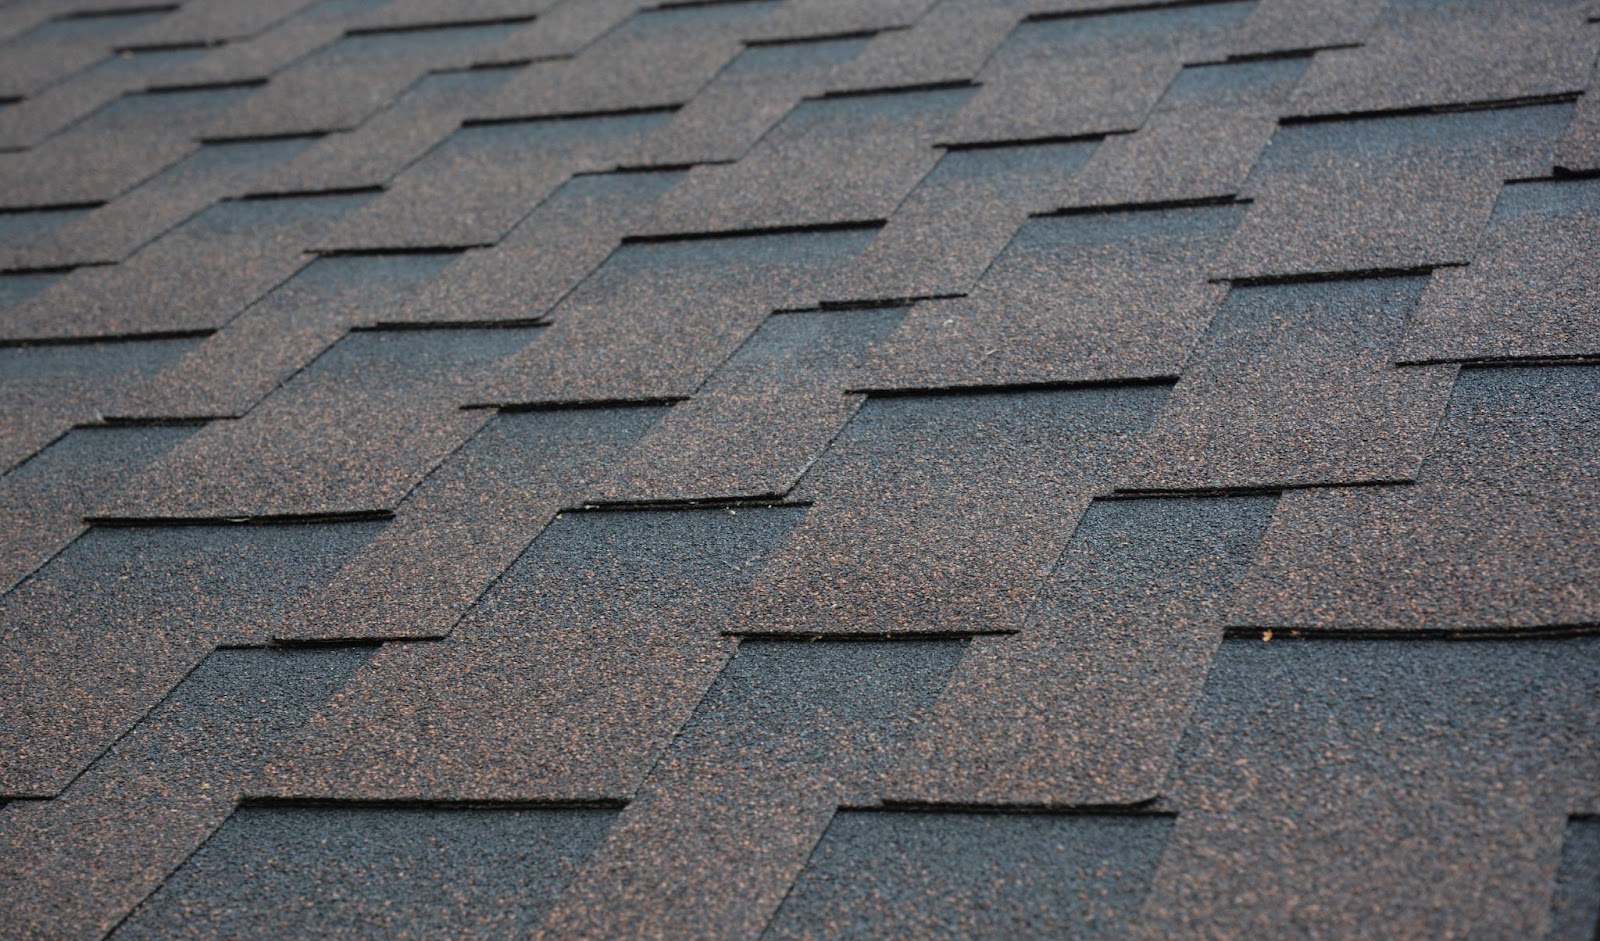 Architectural shingles comes in a variety of colors and configurations